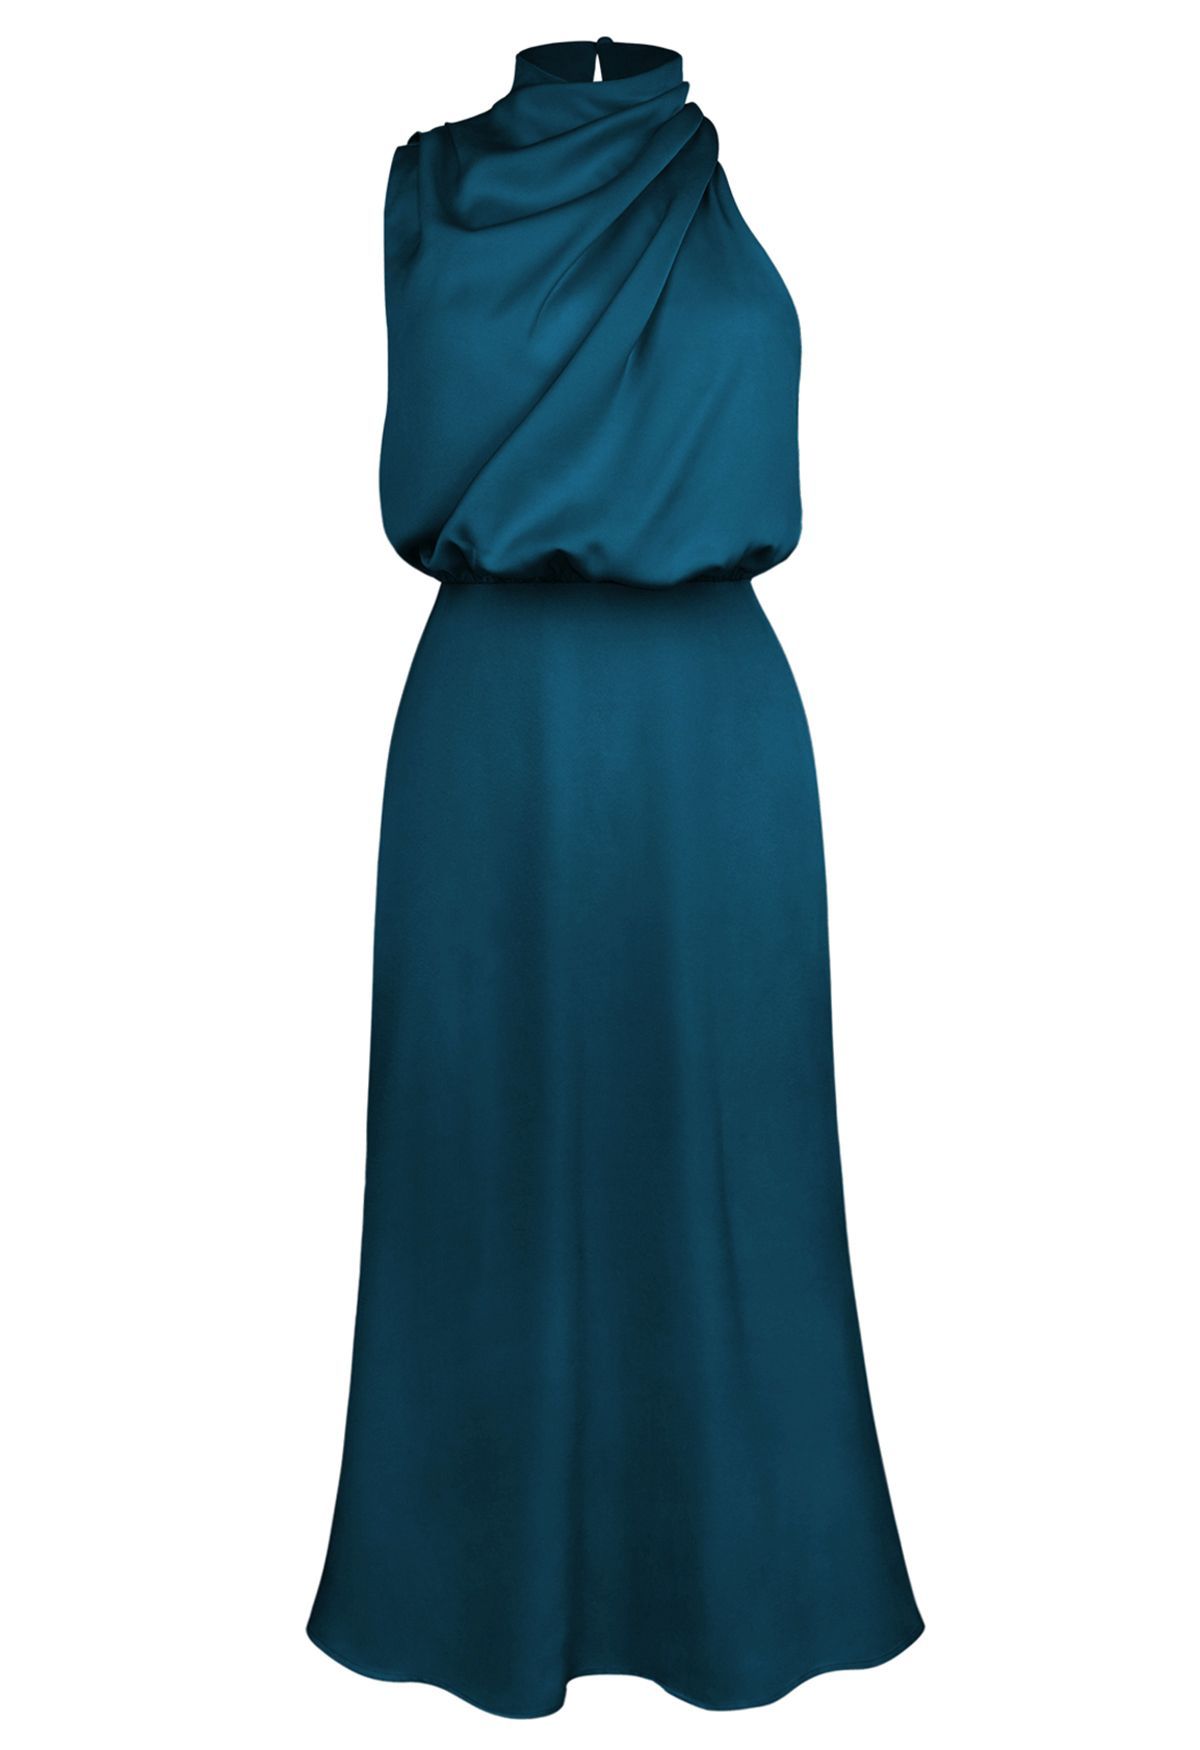 Asymmetric Ruched Neckline Sleeveless Dress in Teal | Chicwish